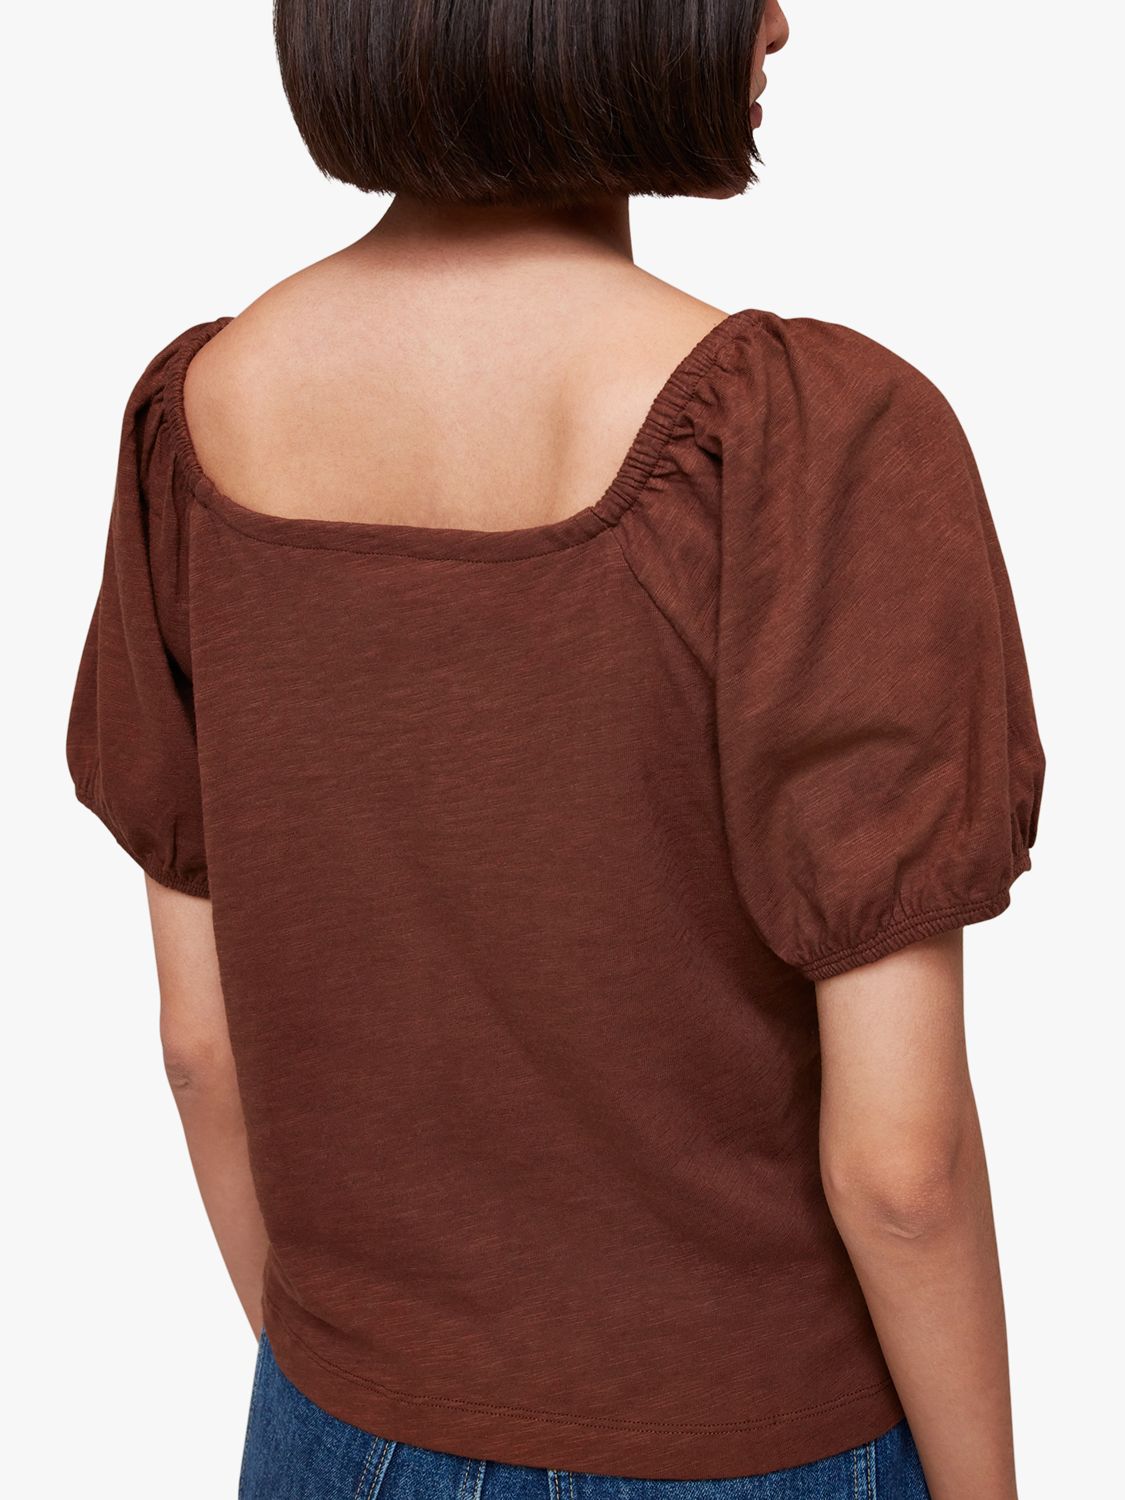 Buy Whistles Square Neck Puff Sleeve Top Online at johnlewis.com